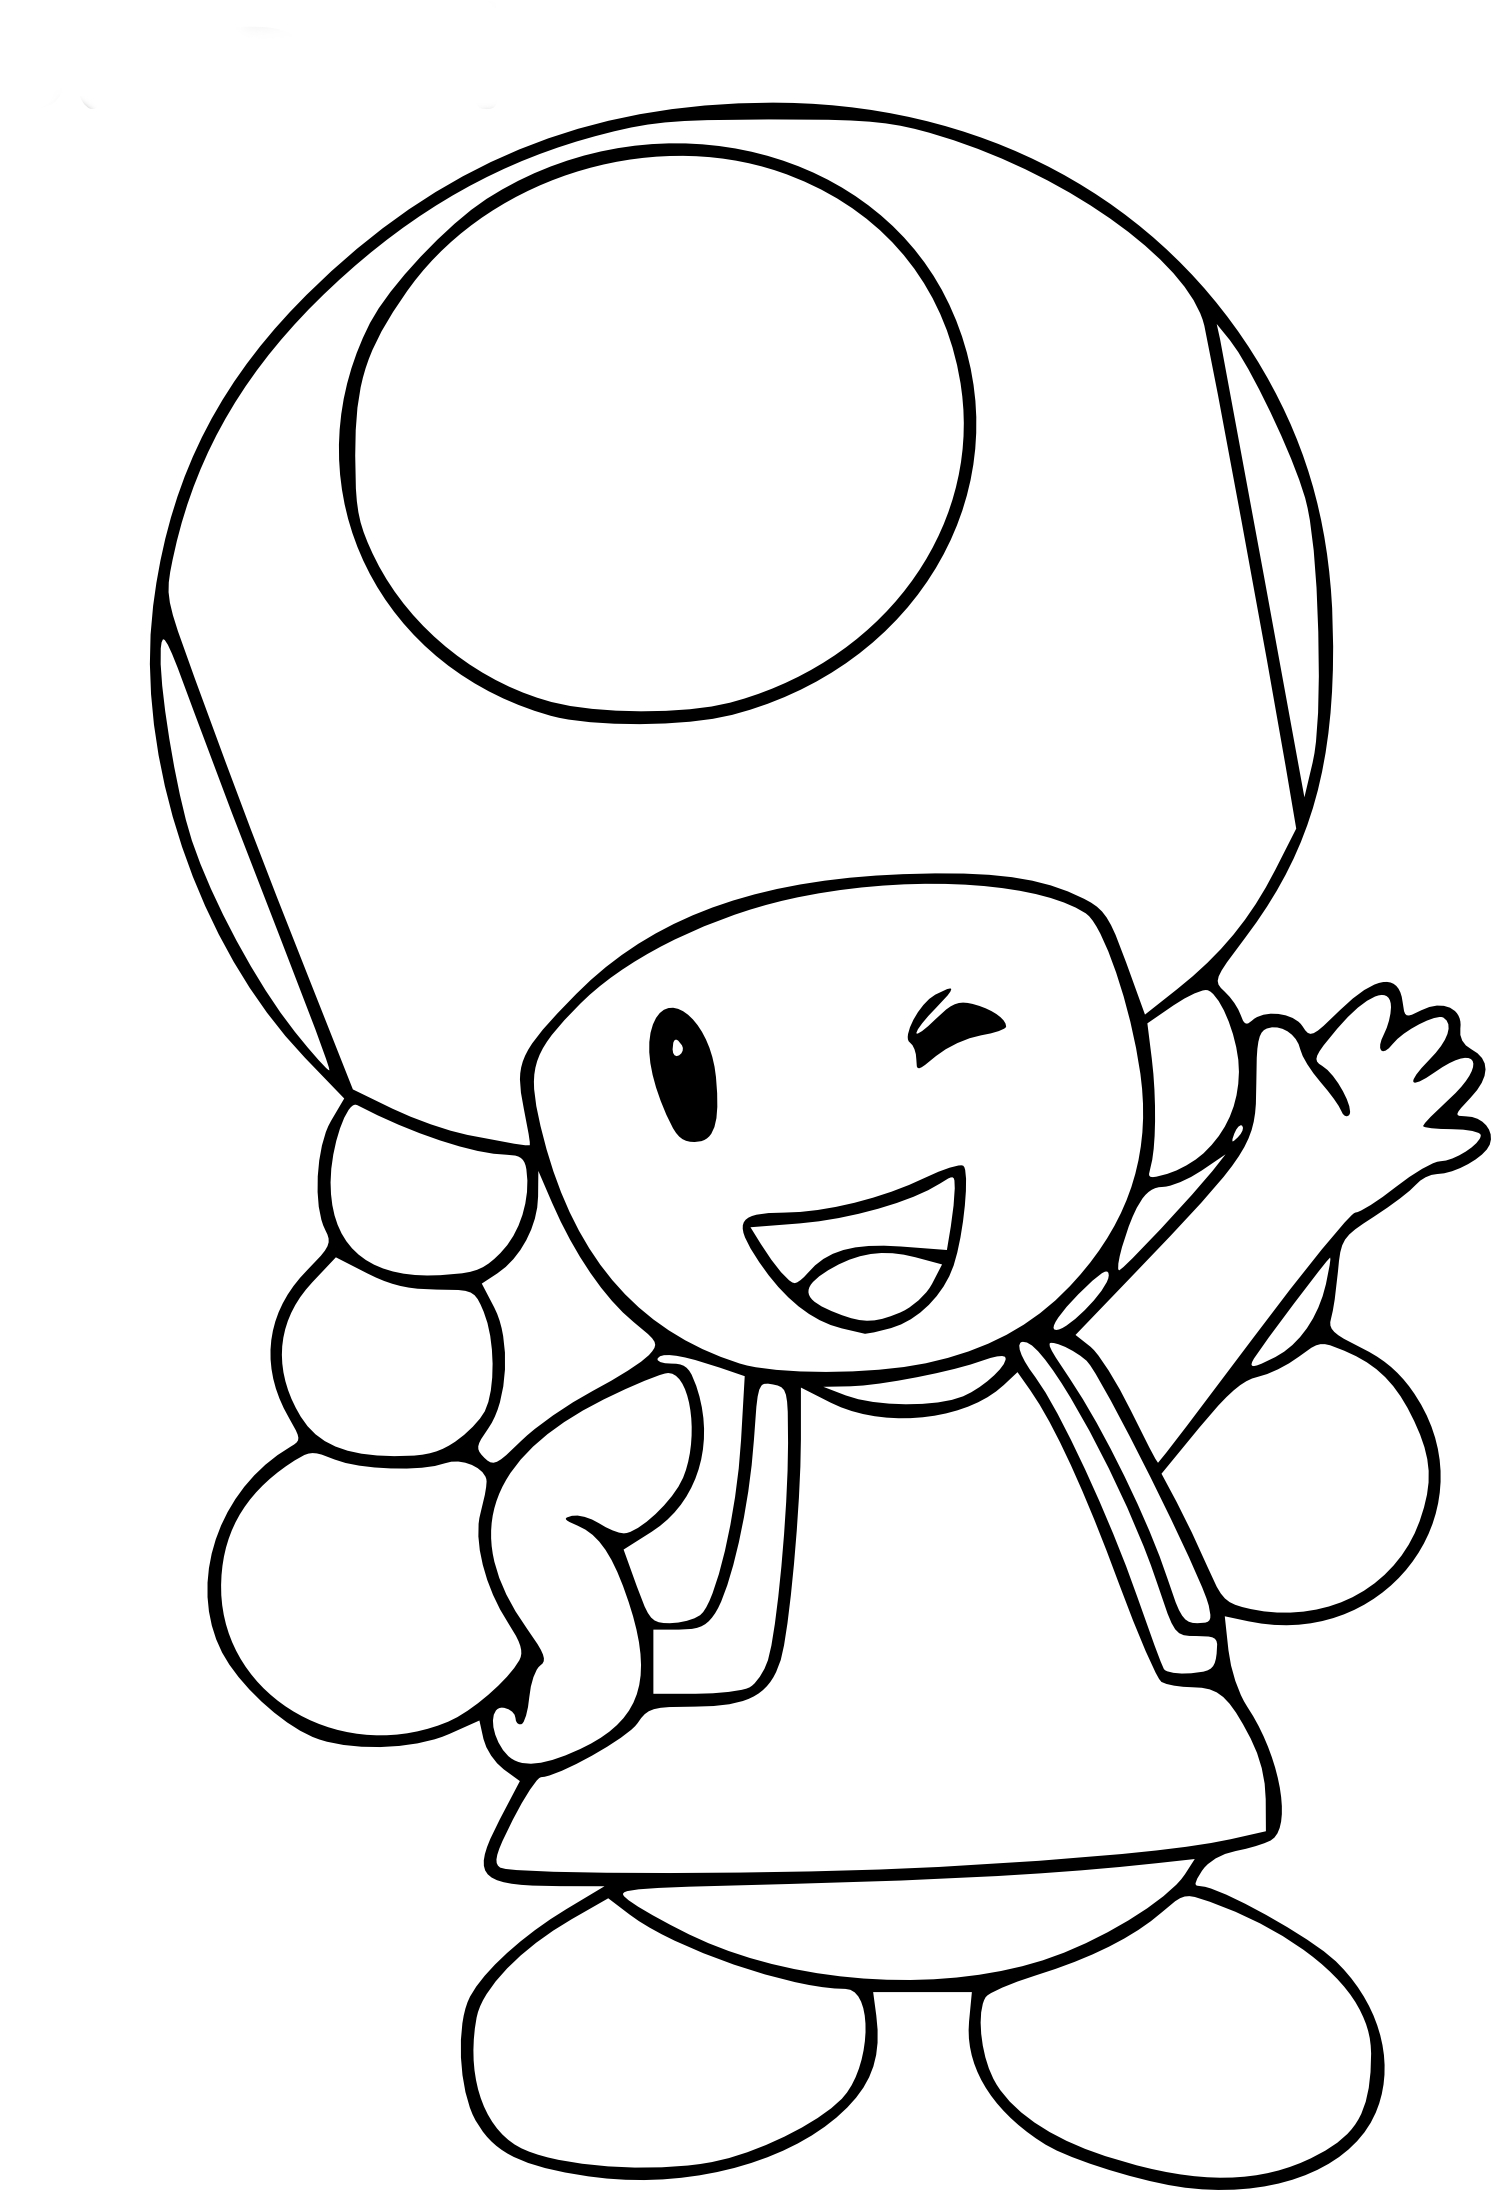 mario toadette coloring pages